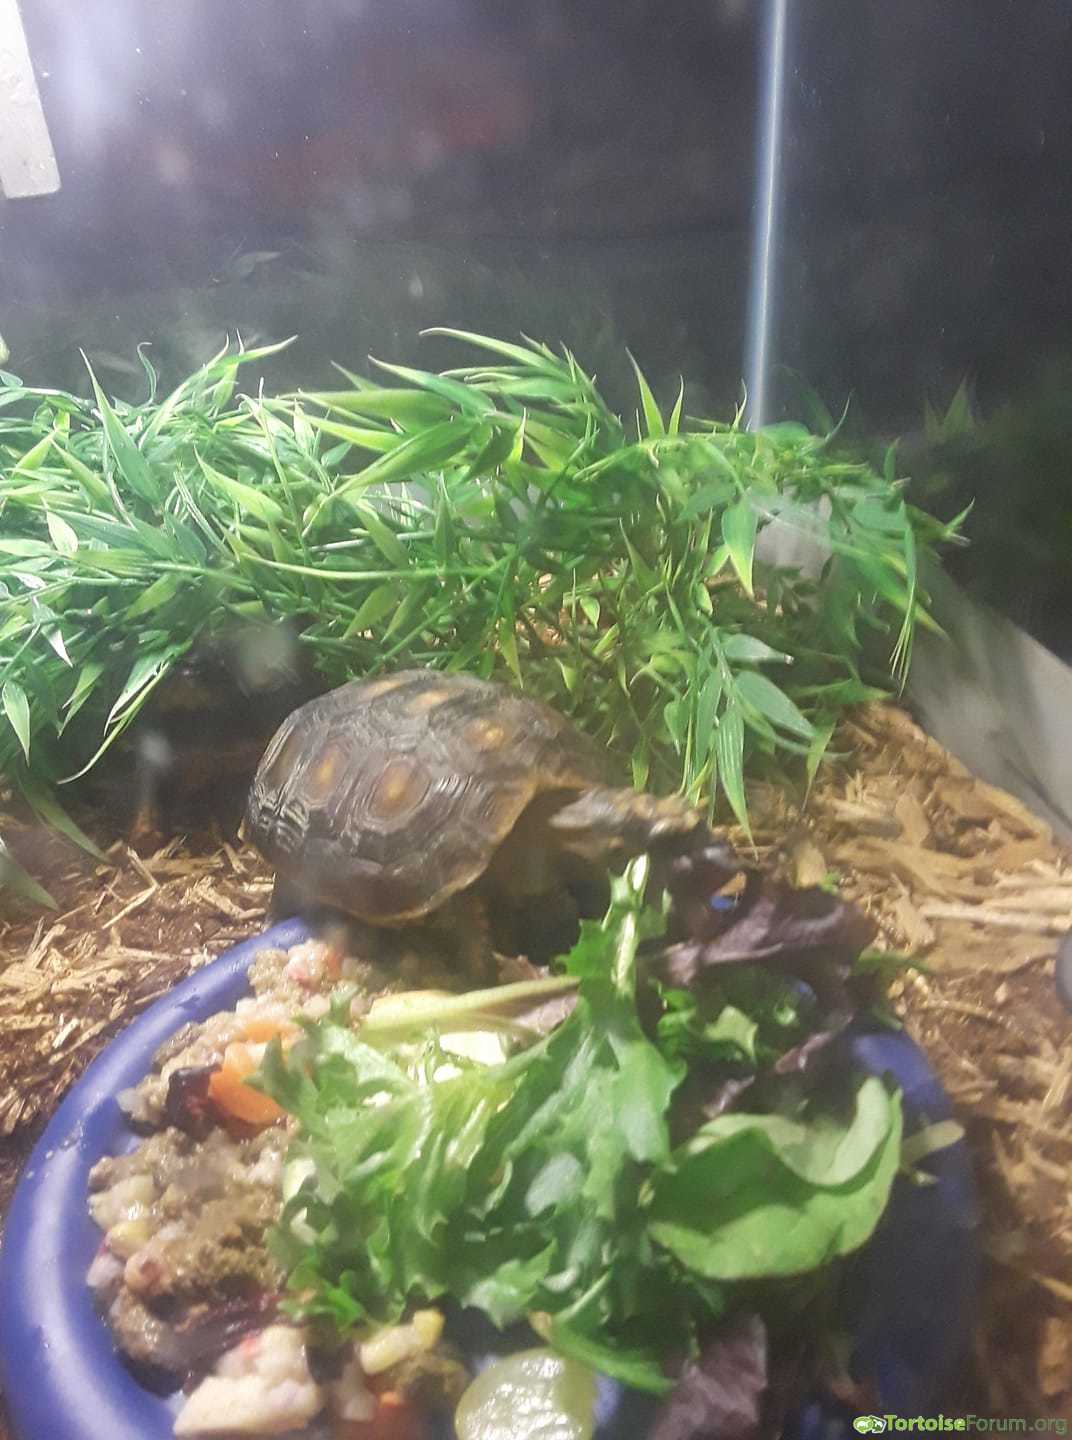 HeShe and HimHer eating in their tank